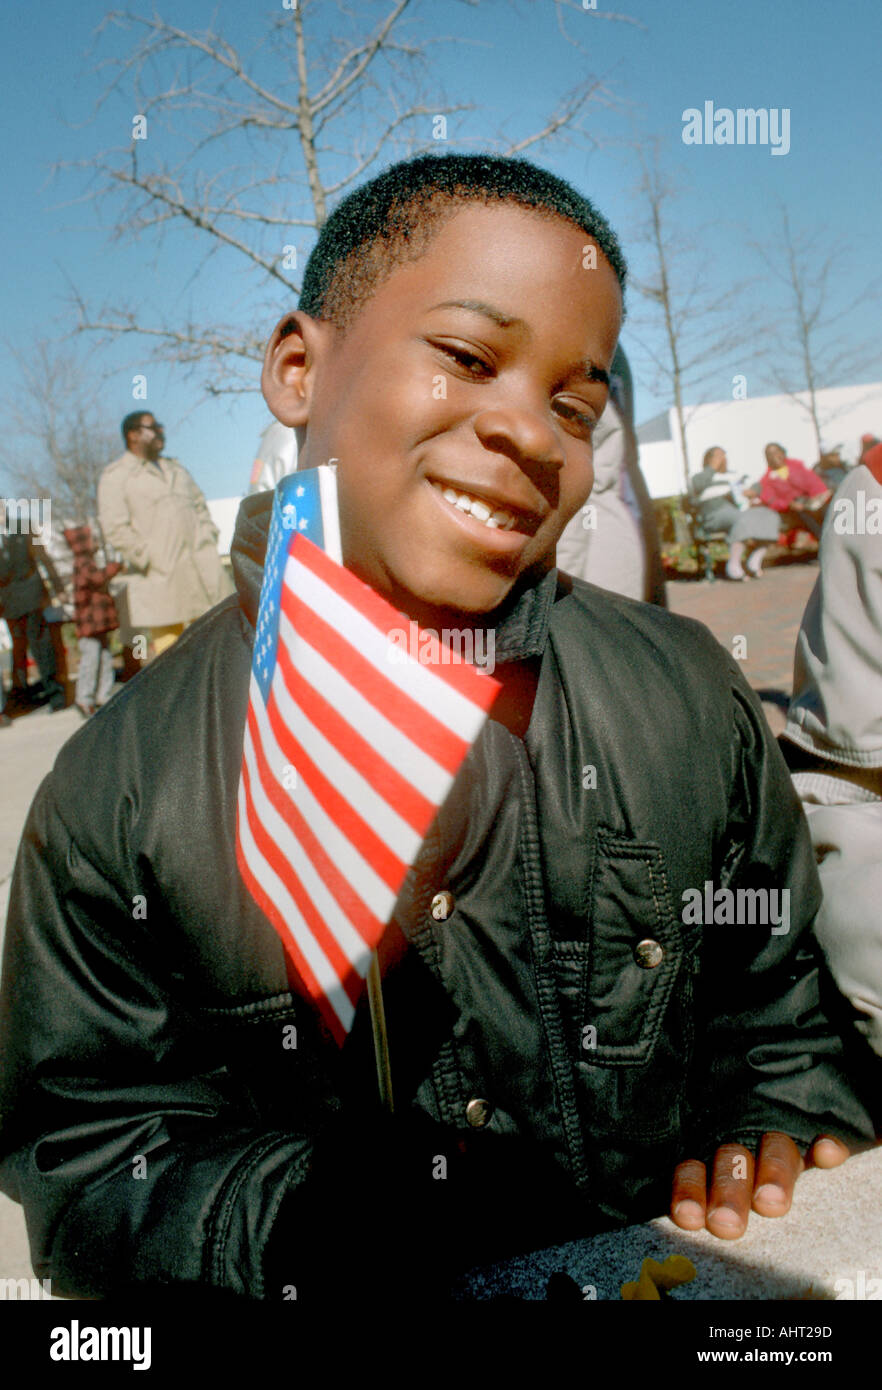 black 10 year old male boy holding a small american flag